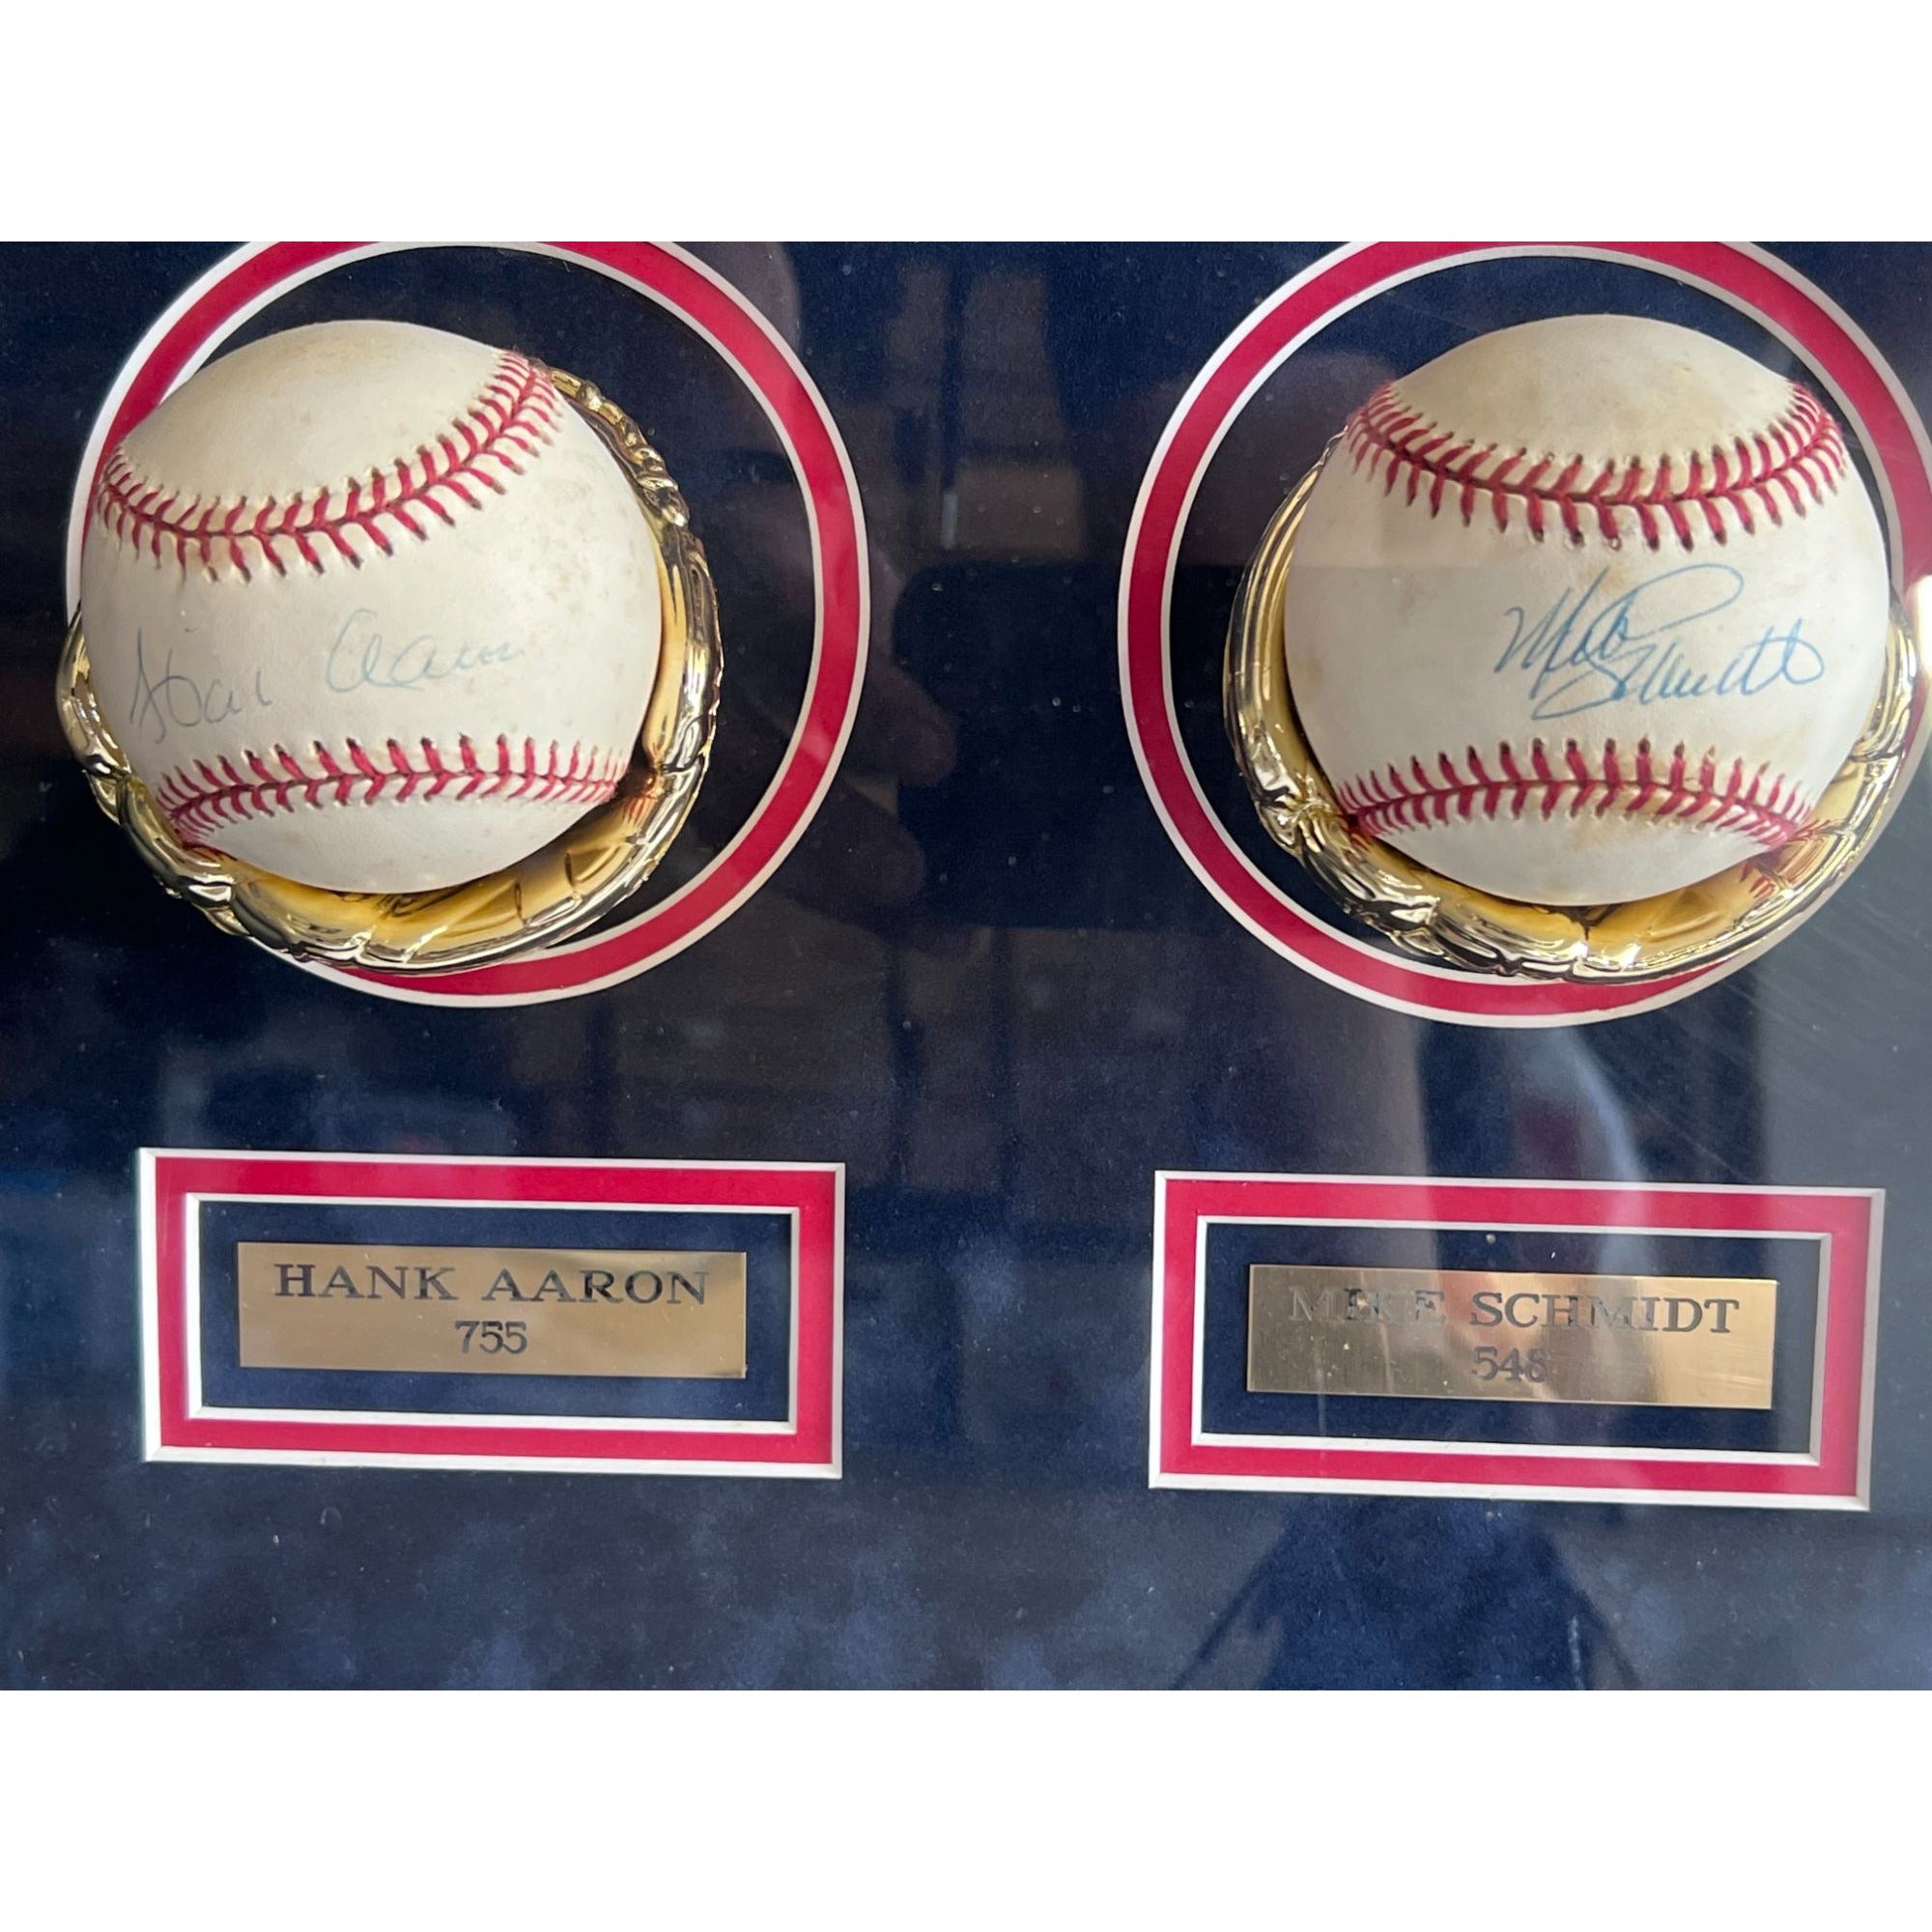 Willie Mays Mickey Mantle Ted Williams 14 MLB baseballs signed by 500 home run hitters 48x42 in frame